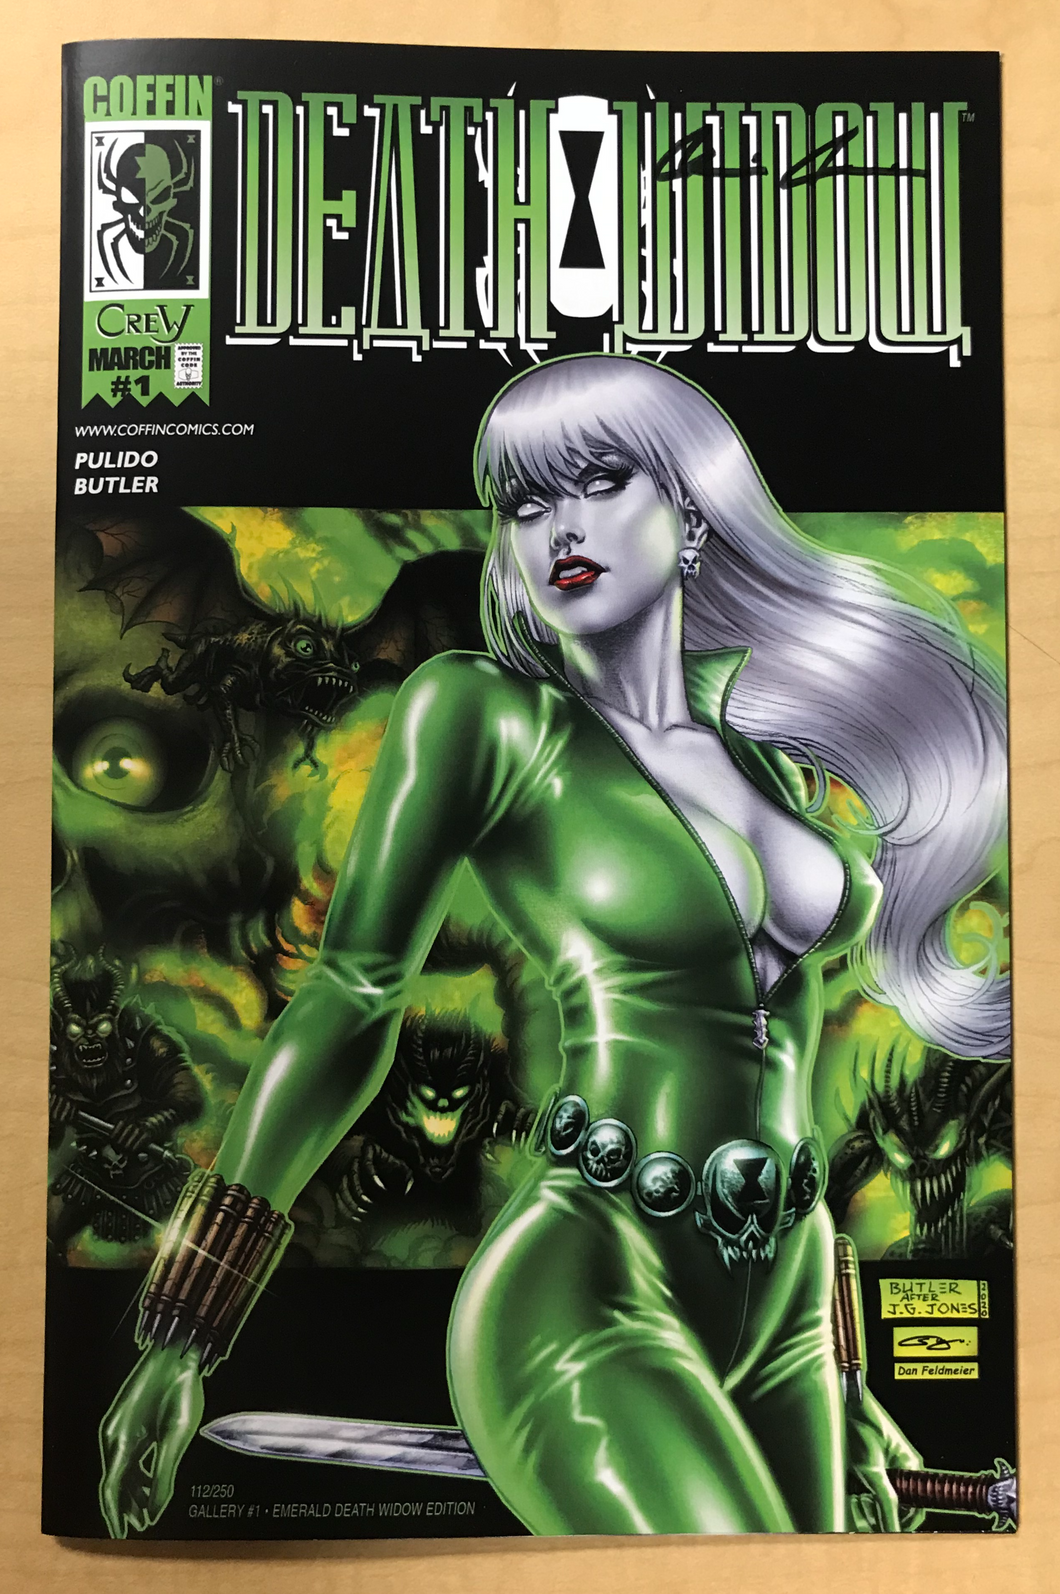 Lady Death: Killers #1 Emerald Death Widow Edition by Steven Butler ECCC Exclusive Signed by Brian Pulido w/ COA Black Widow Homage Only 250 Copies Made!!!